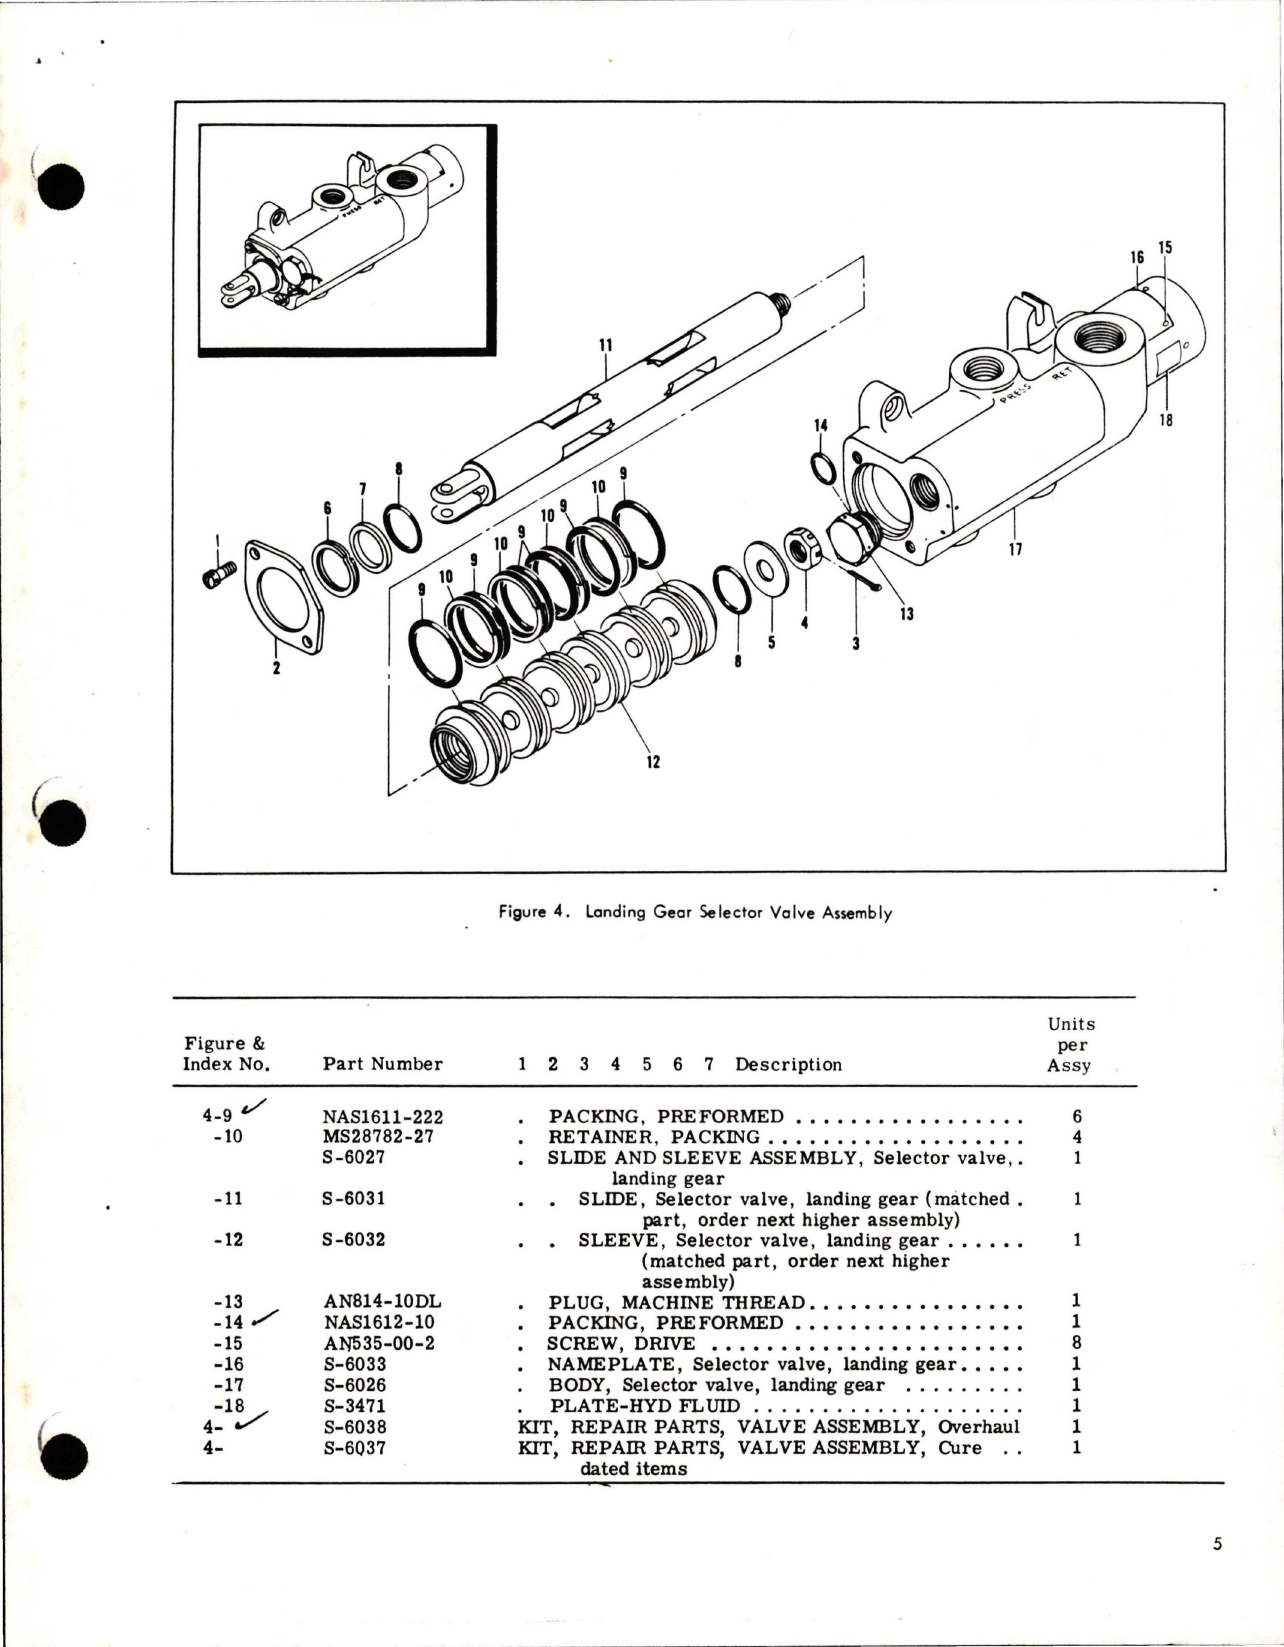 Sample page 5 from AirCorps Library document: Overhaul Manual with Parts Breakdown for Landing Gear Selector Valve Assembly - Part S-6025-2